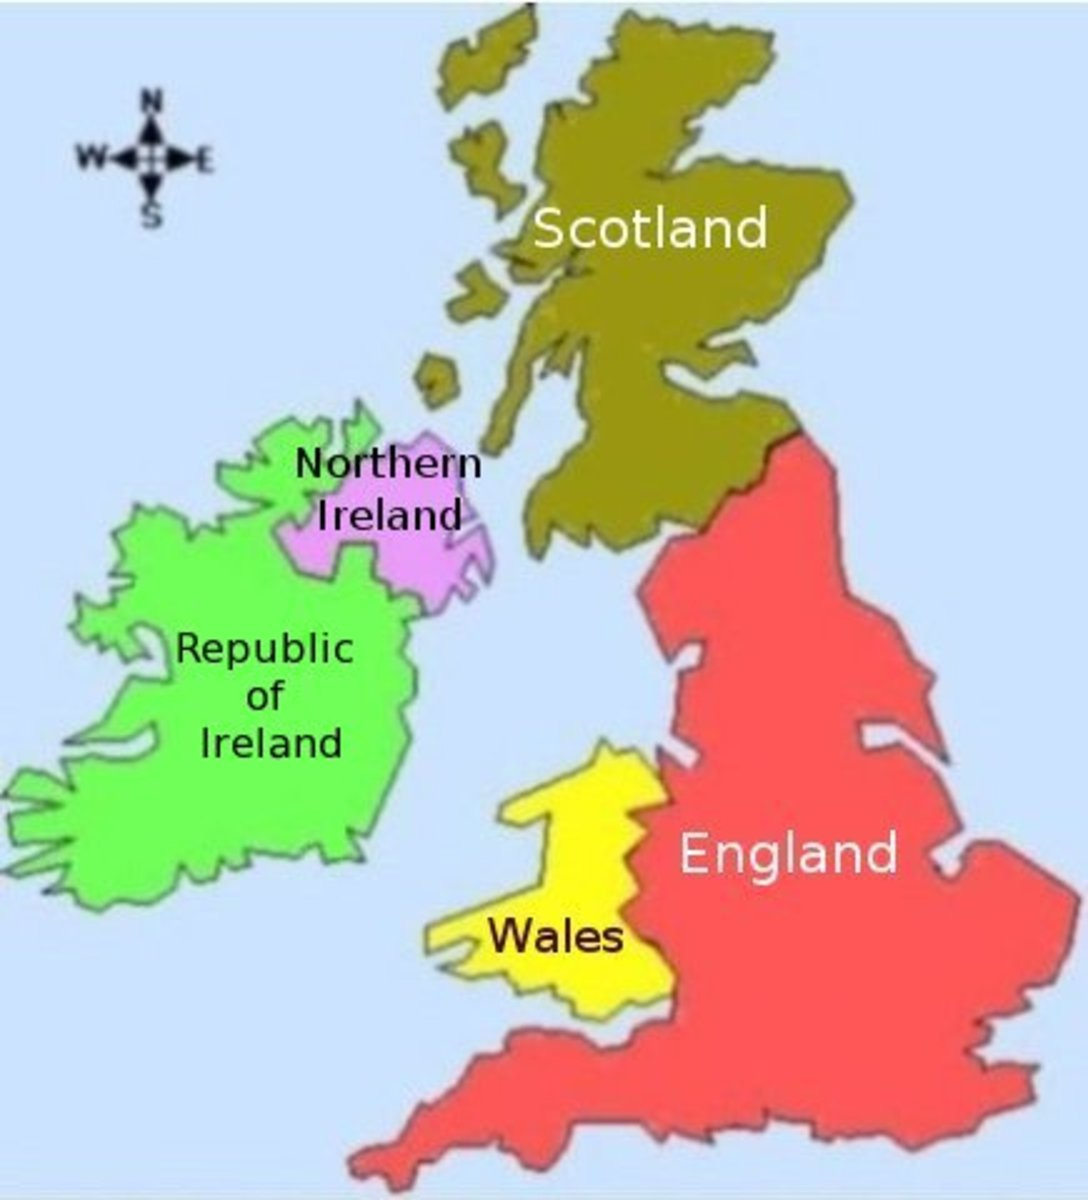 Geography Lesson Plans: The British Isles - HubPages